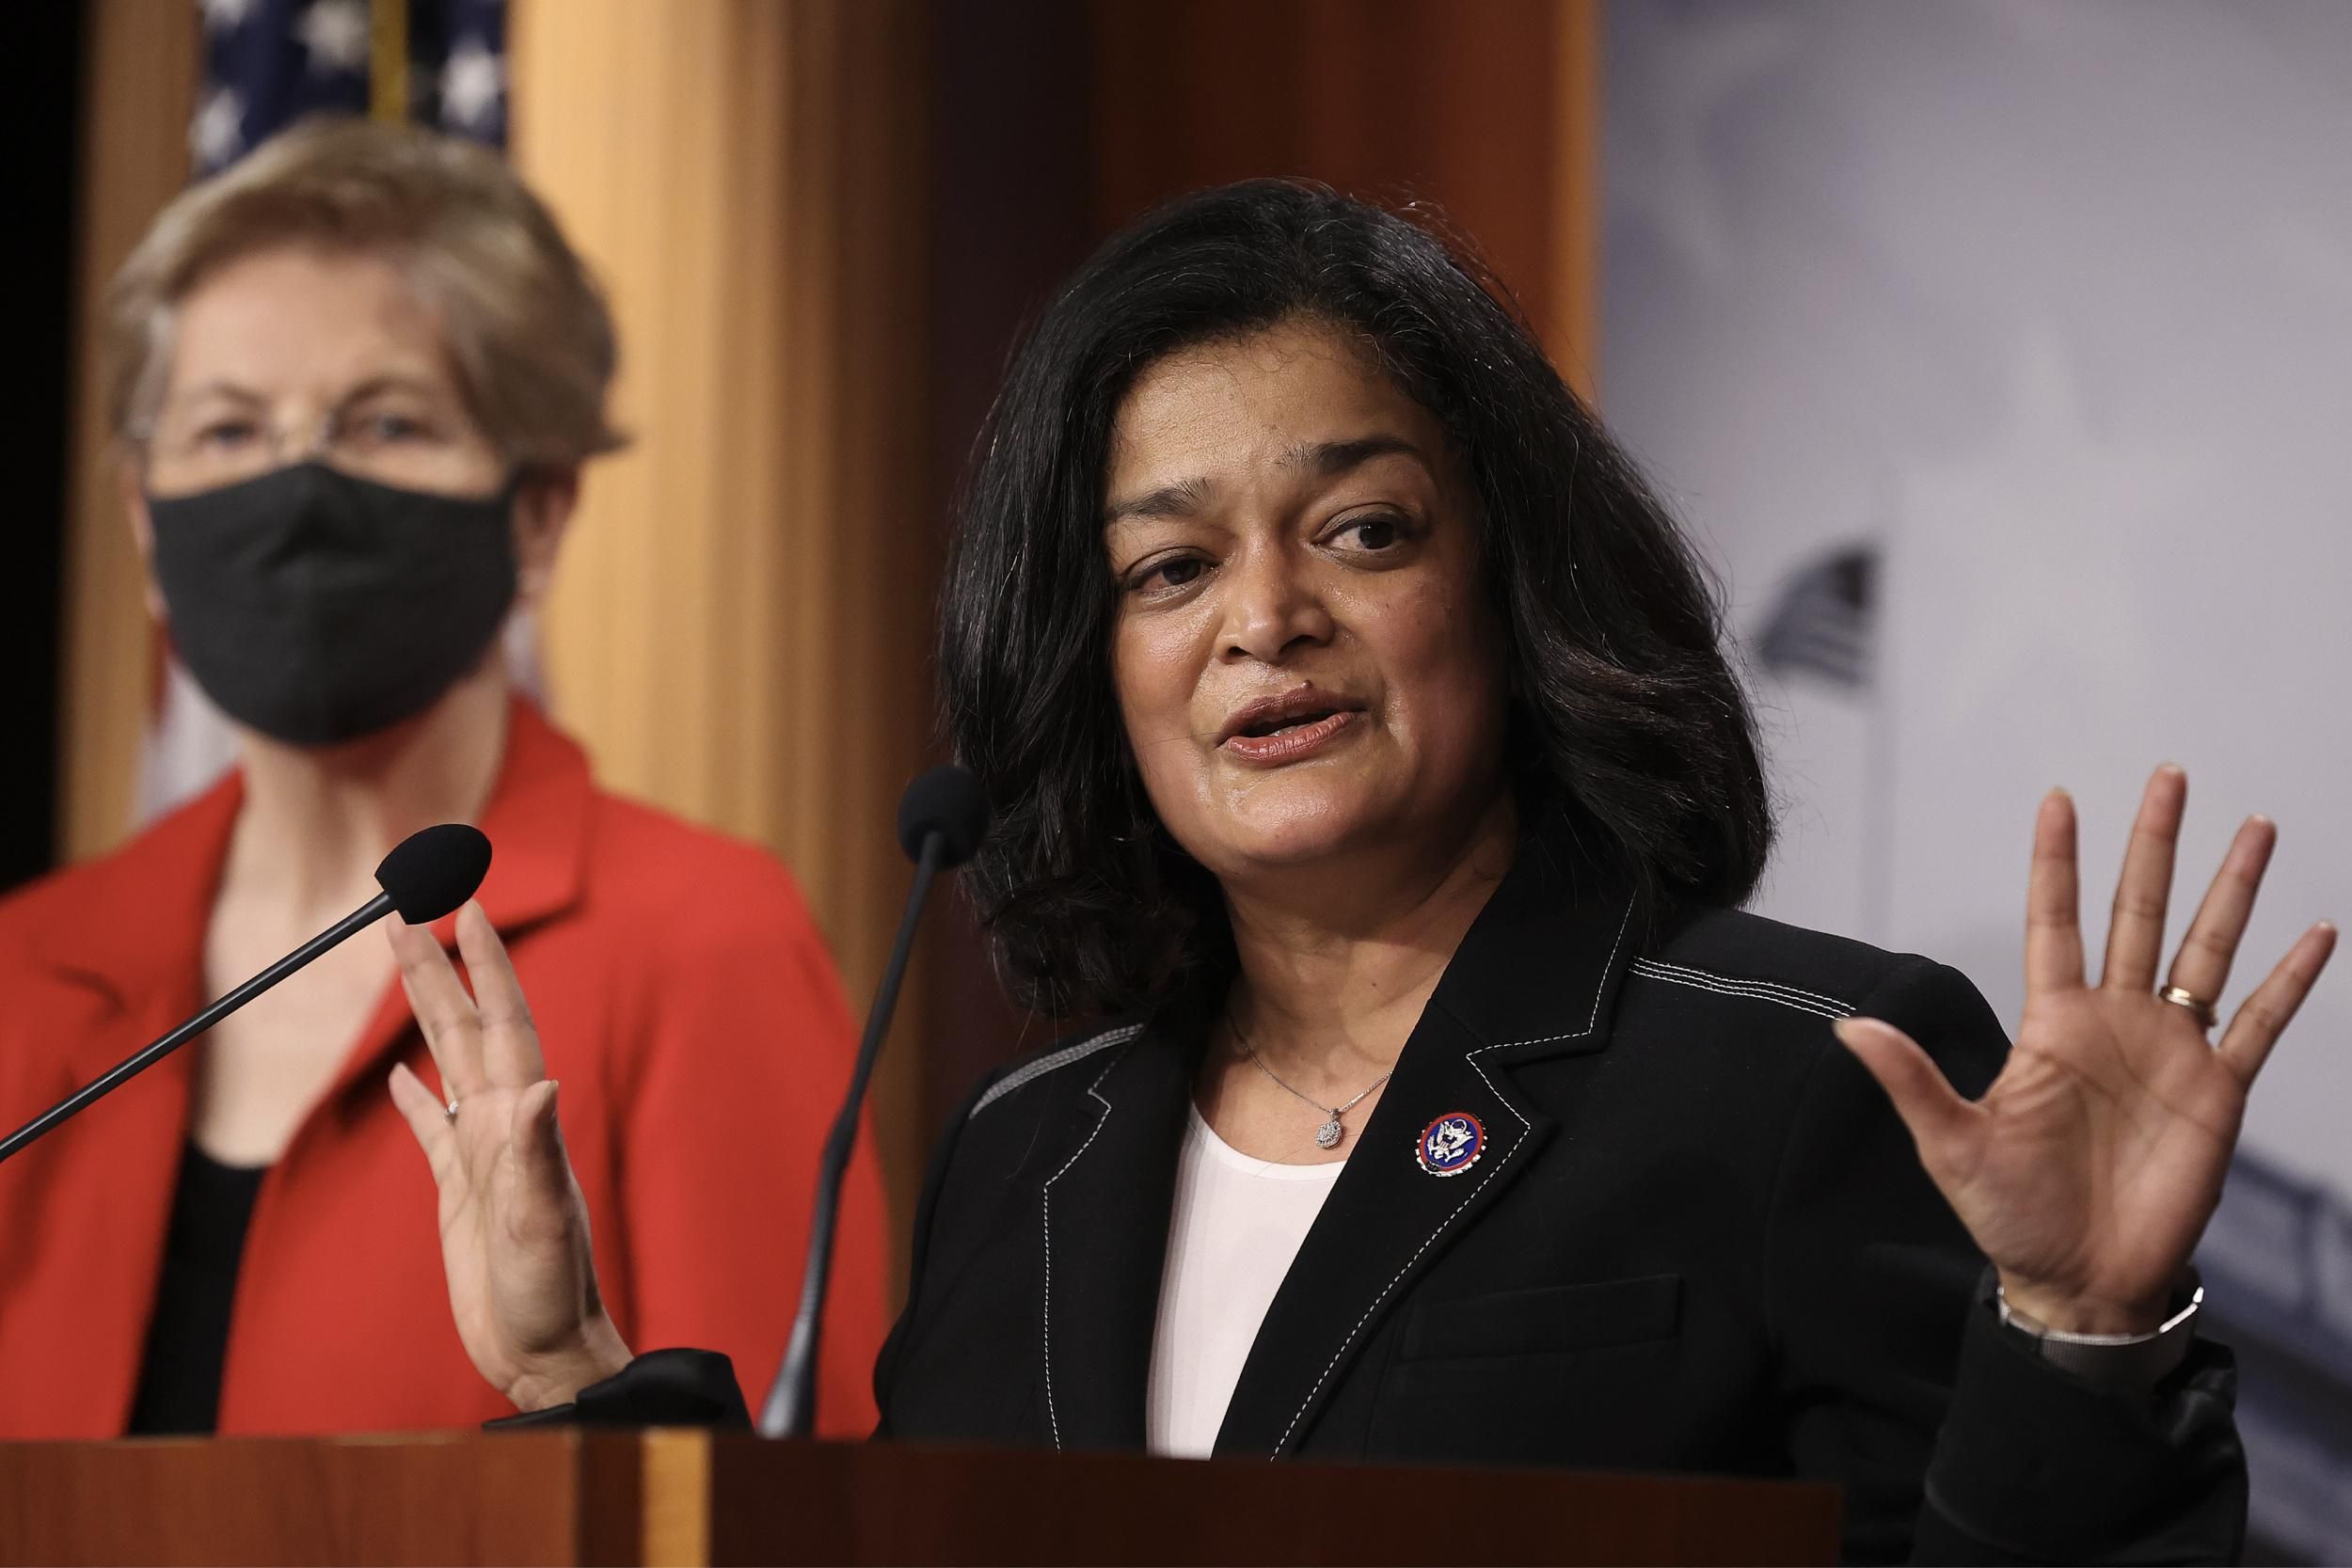 Rep. Pramila Jayapal (D-Wash.) speaks during a news conference with Sen. Elizabeth Warren (D-Mass.) to announce legislation that would tax the net worth of America's wealthiest individuals at the U.S. Capitol on March 01, 2021 in Washington, DC. (Photo:Chip Somodevilla/Getty Images)